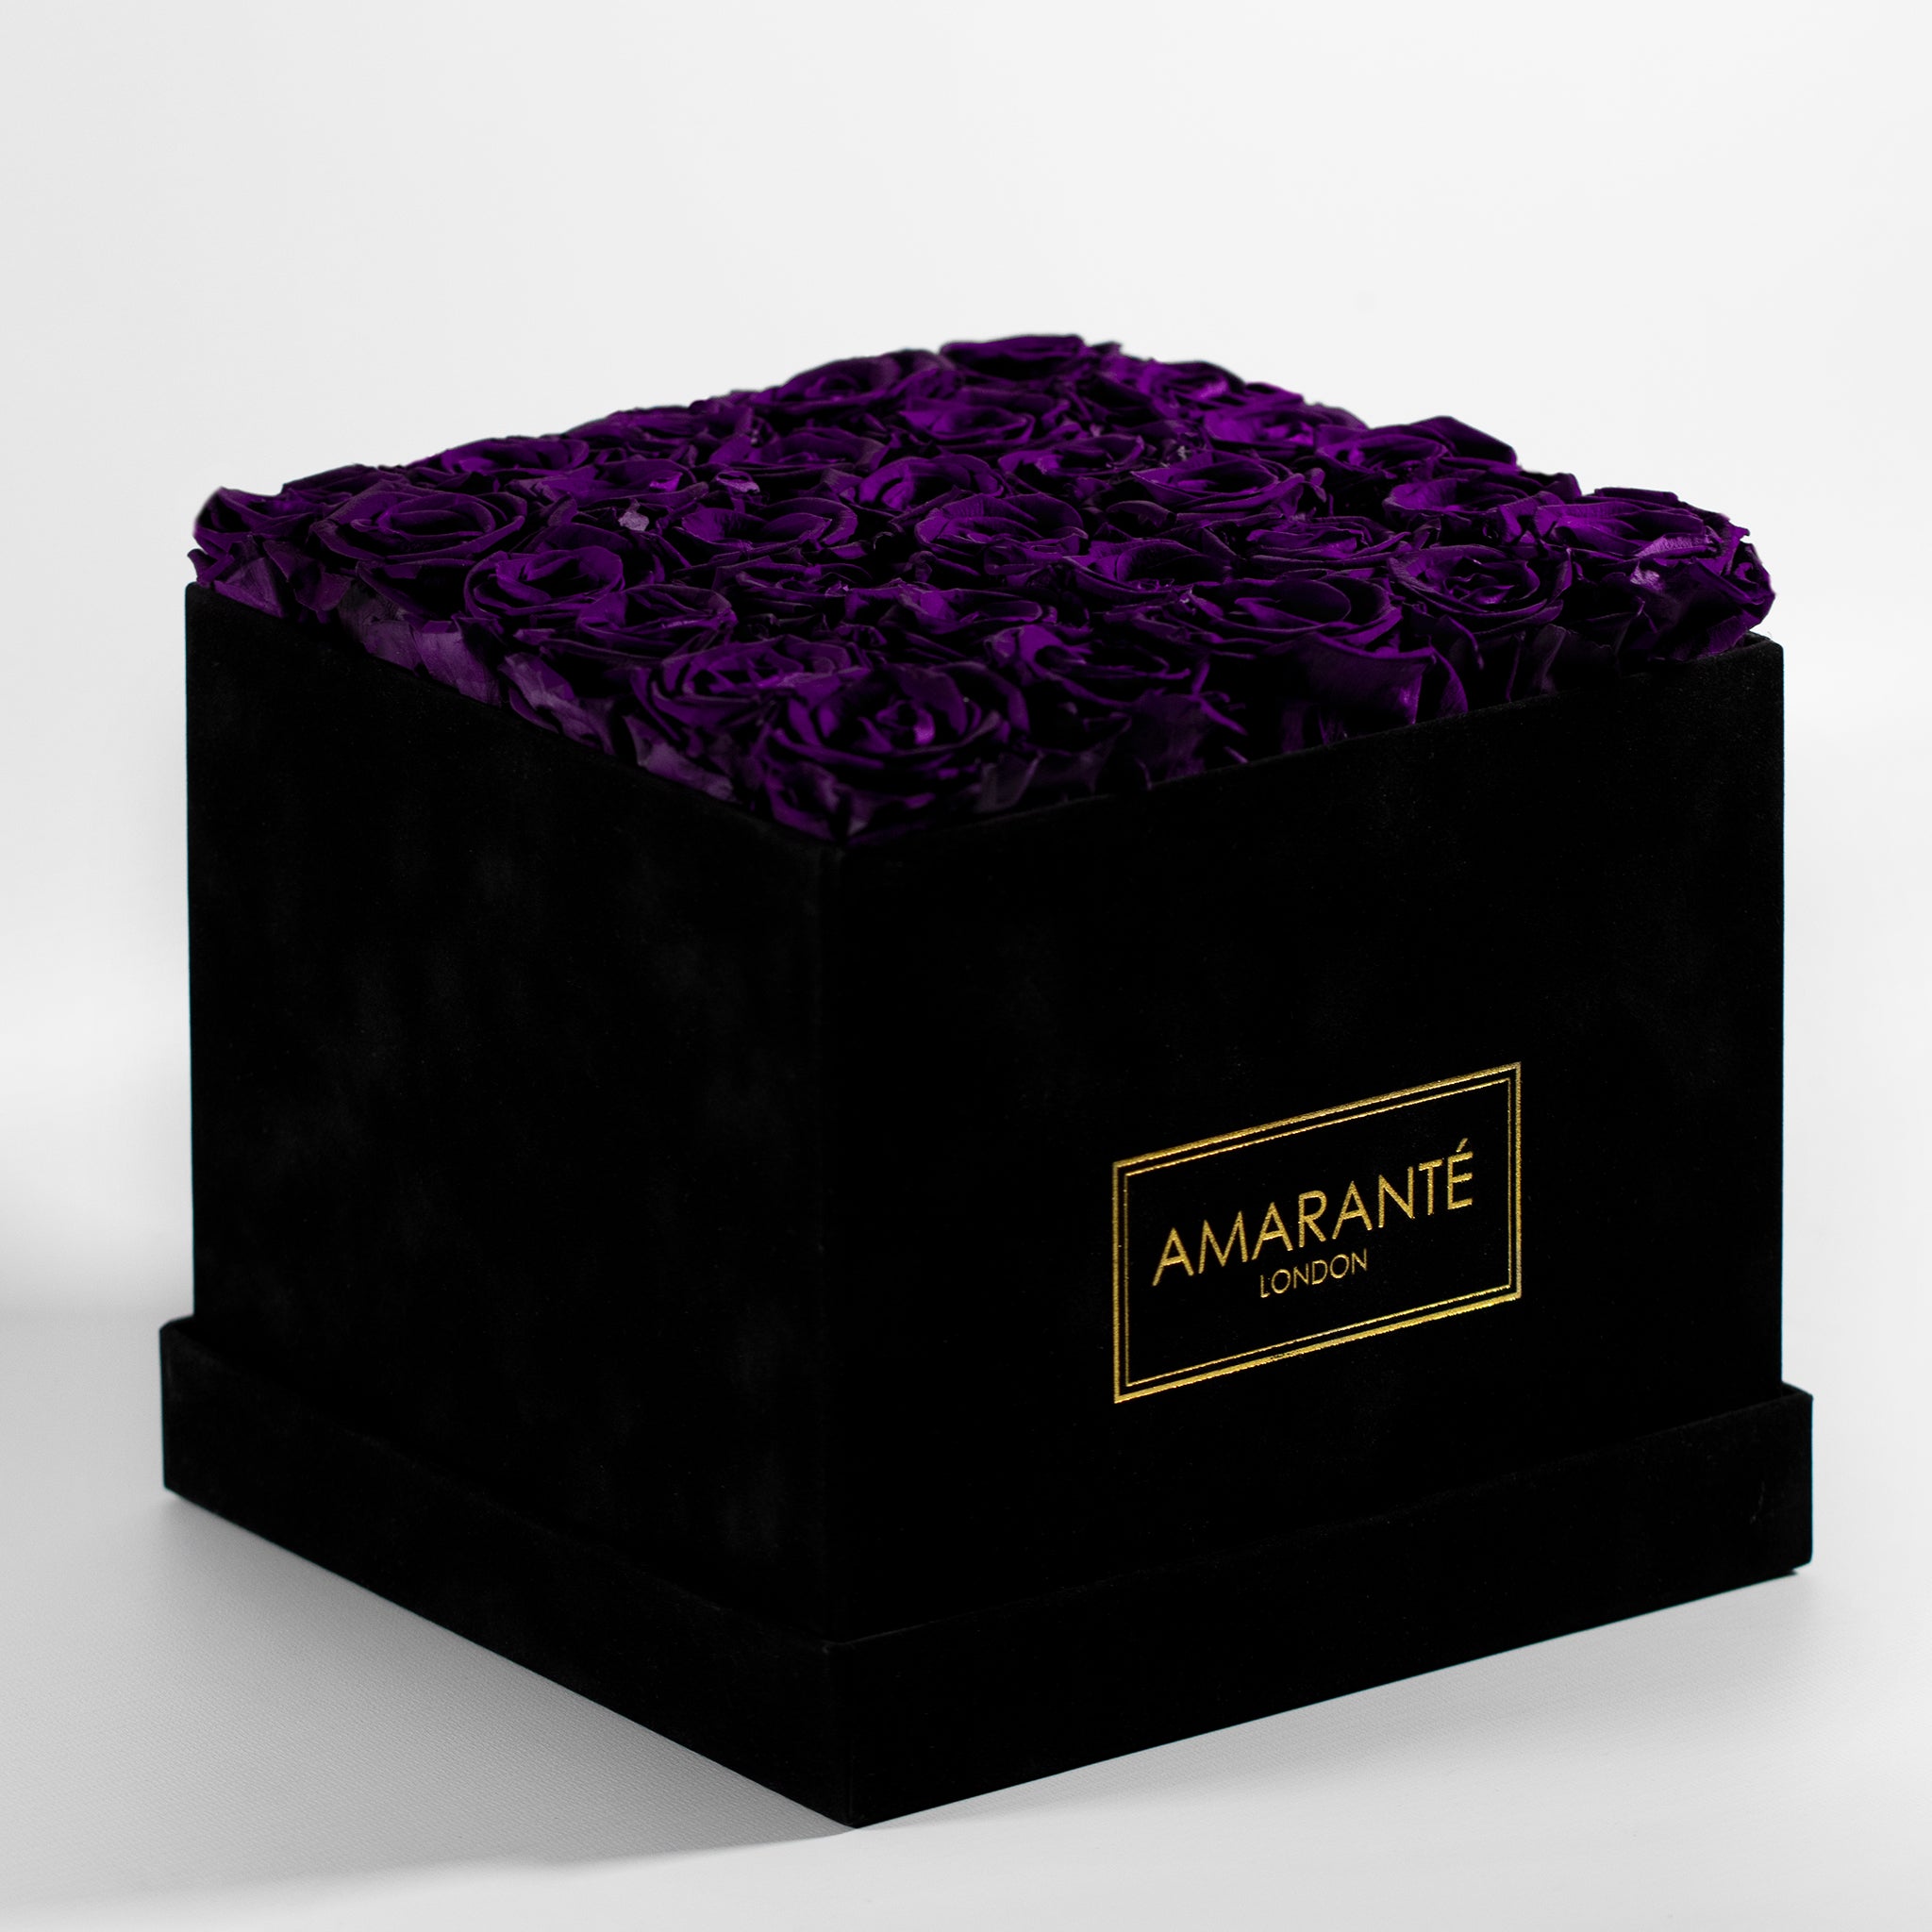 Magical dark purple coloured Roses denoting protection, security, and wisdom. 